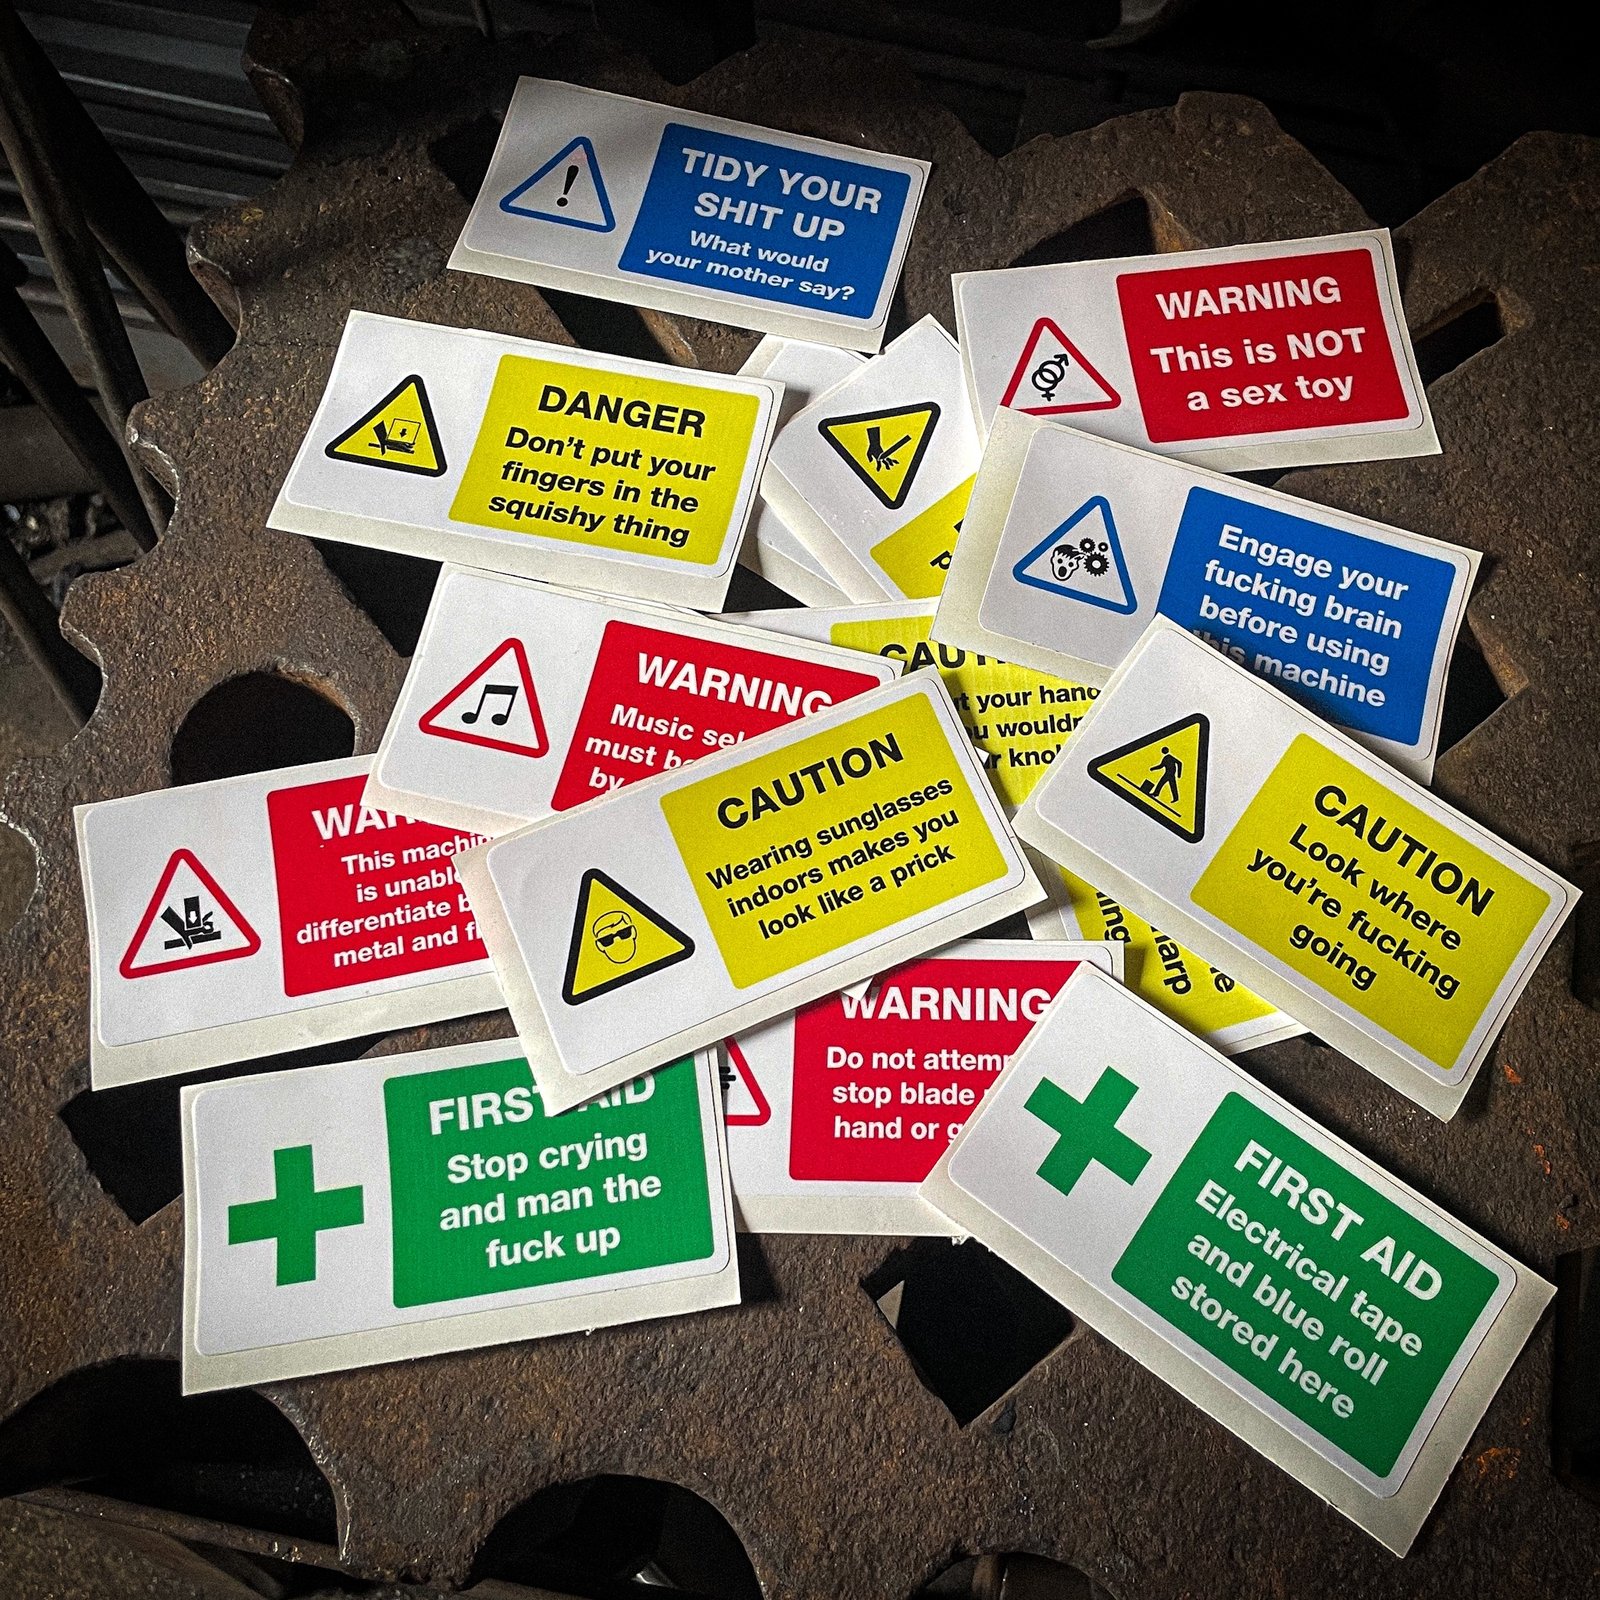 Funny workshop "safety" stickers